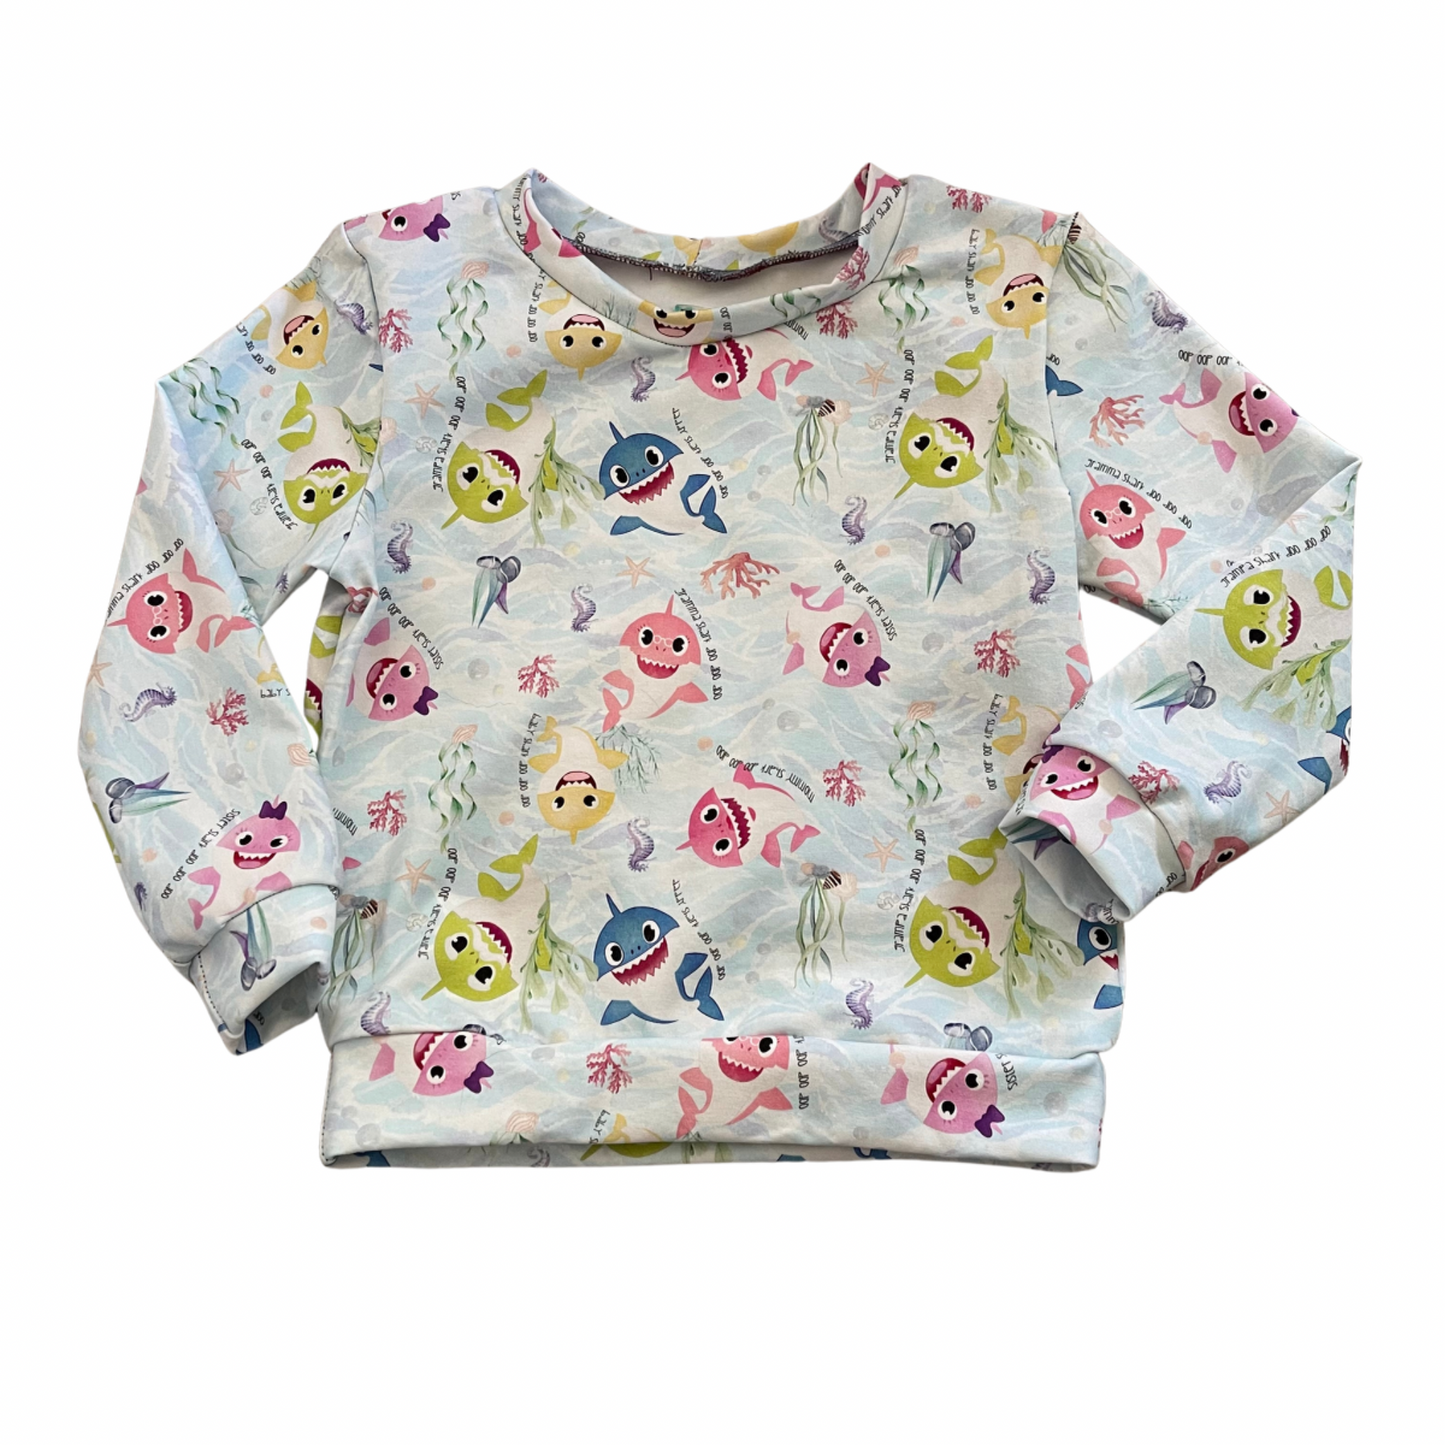 Shark Friends - Lounge Top - 12m, 3T, and 4T